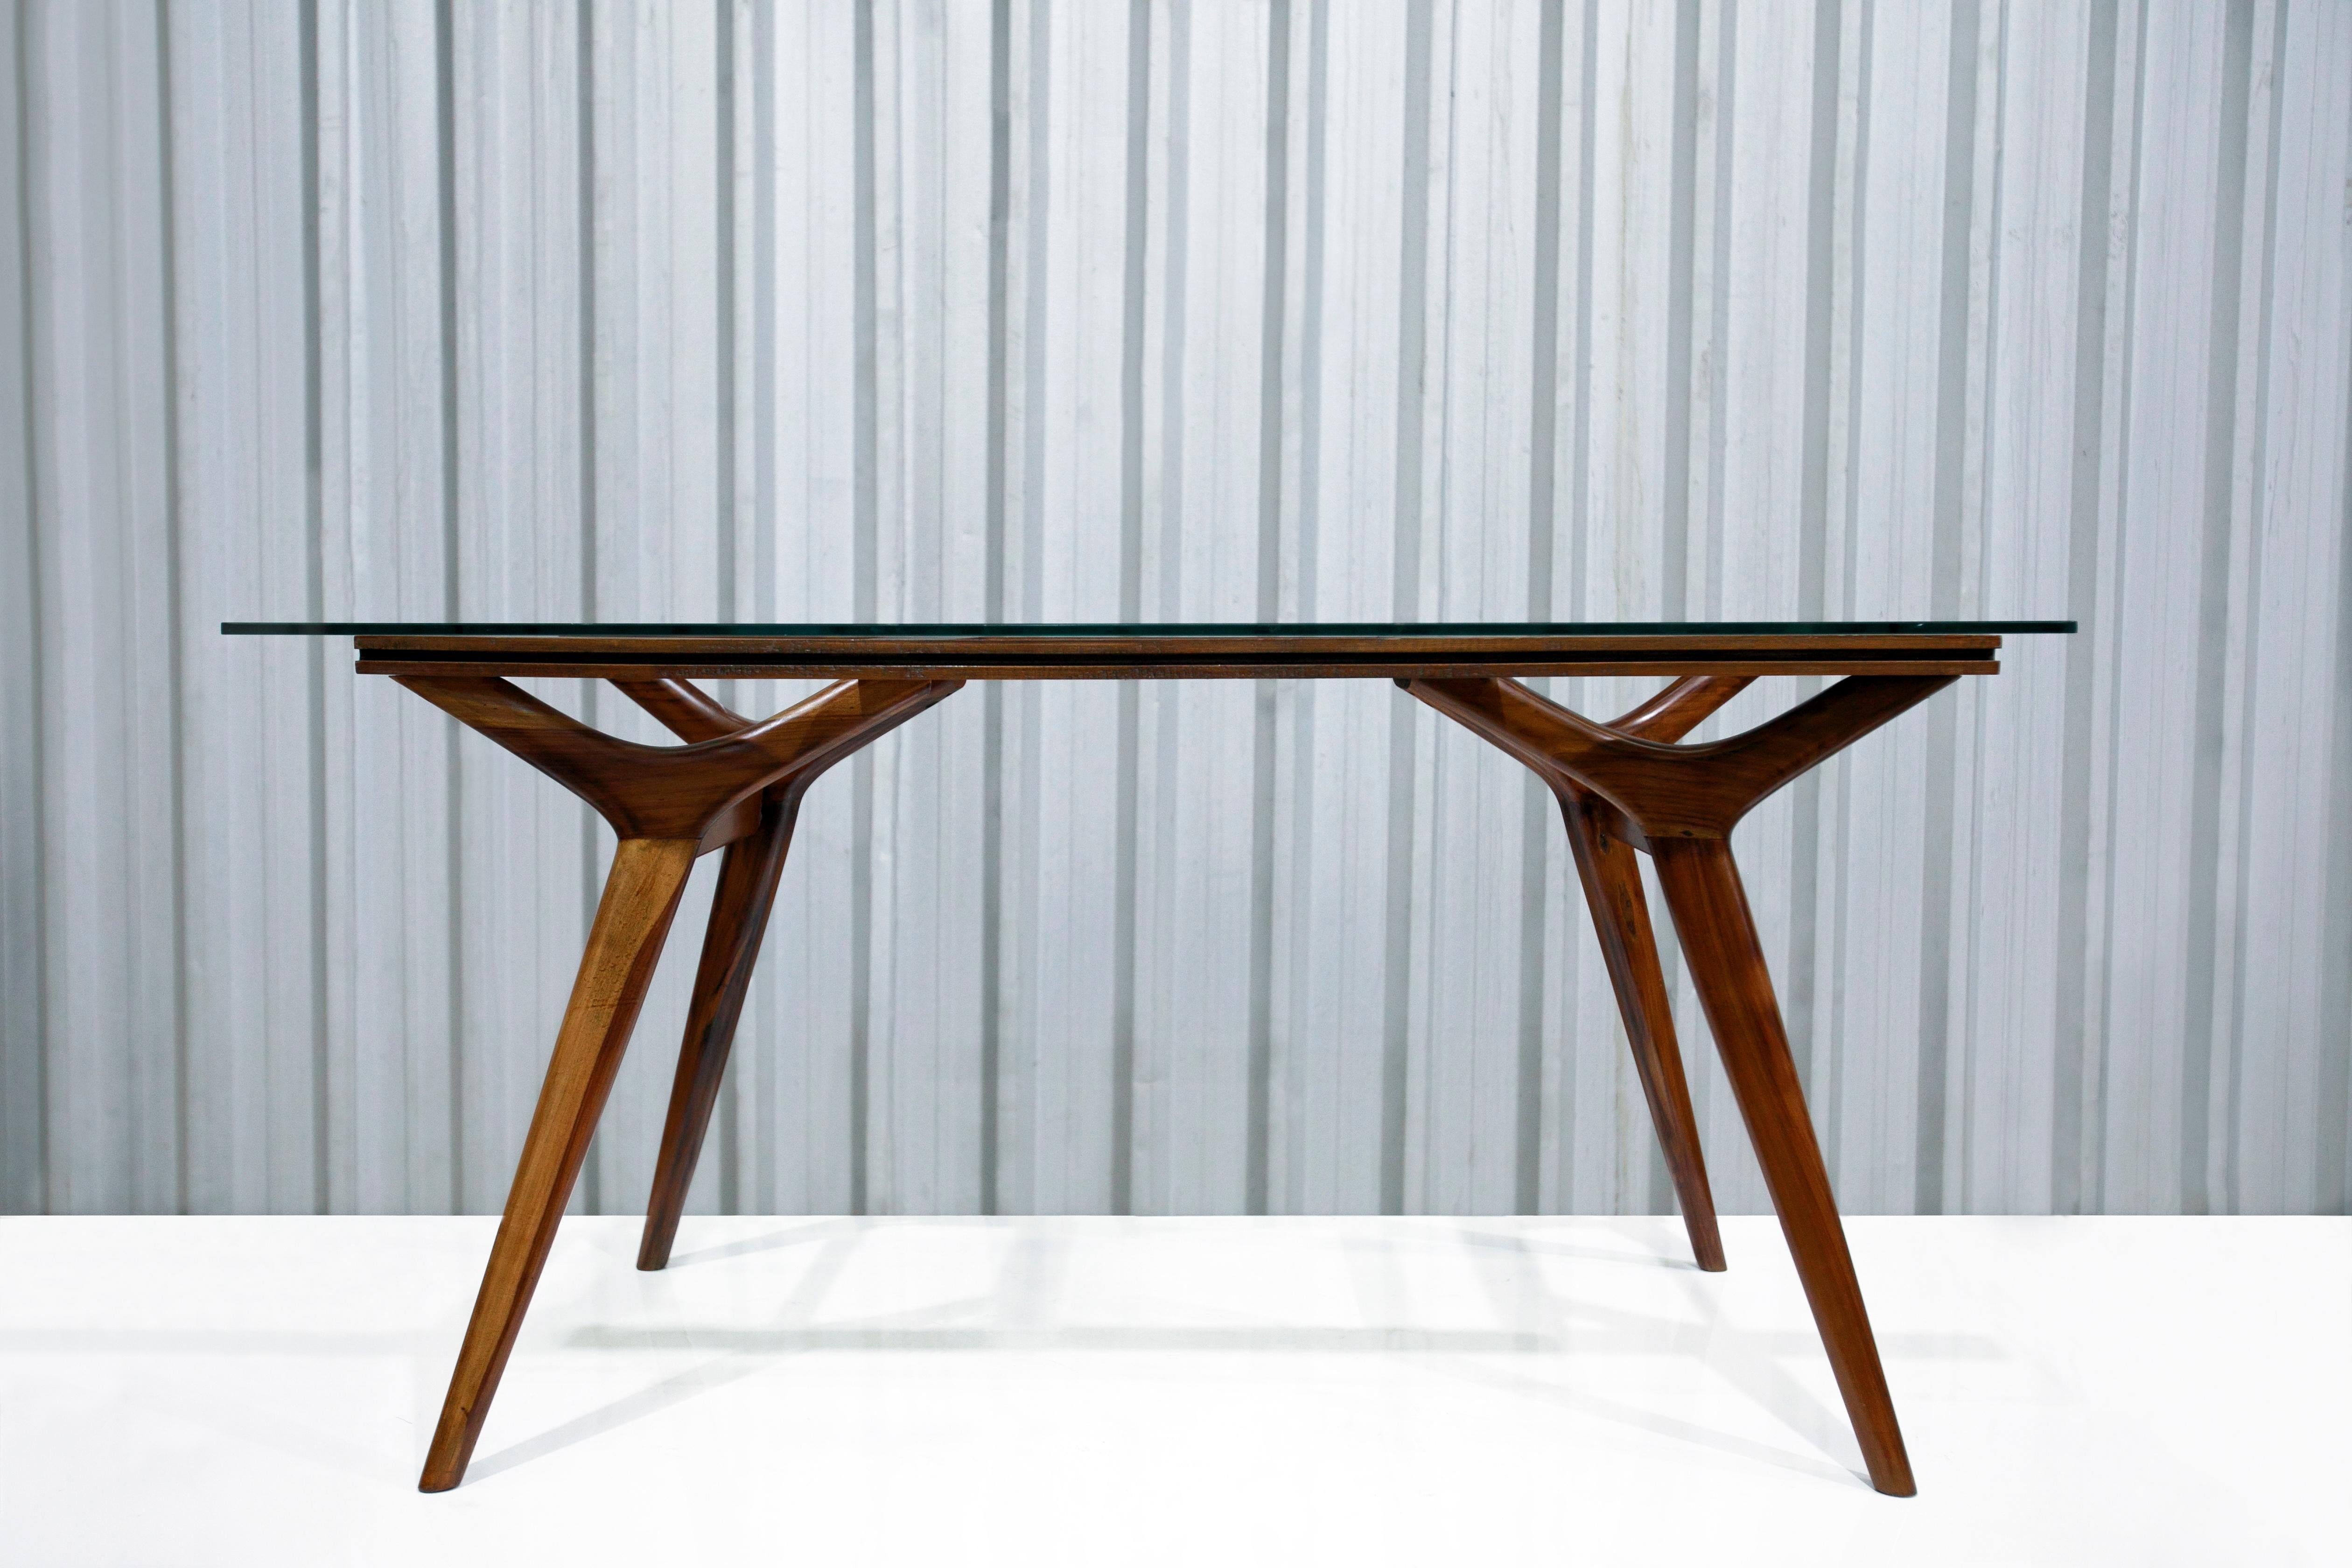 The frame of the dining table is made with caviuna hardwood and features a glass table top. The legs of the table are angled and have a very slim profile. In addition, the design is super simplistic and looks amazing at the same time. This dining